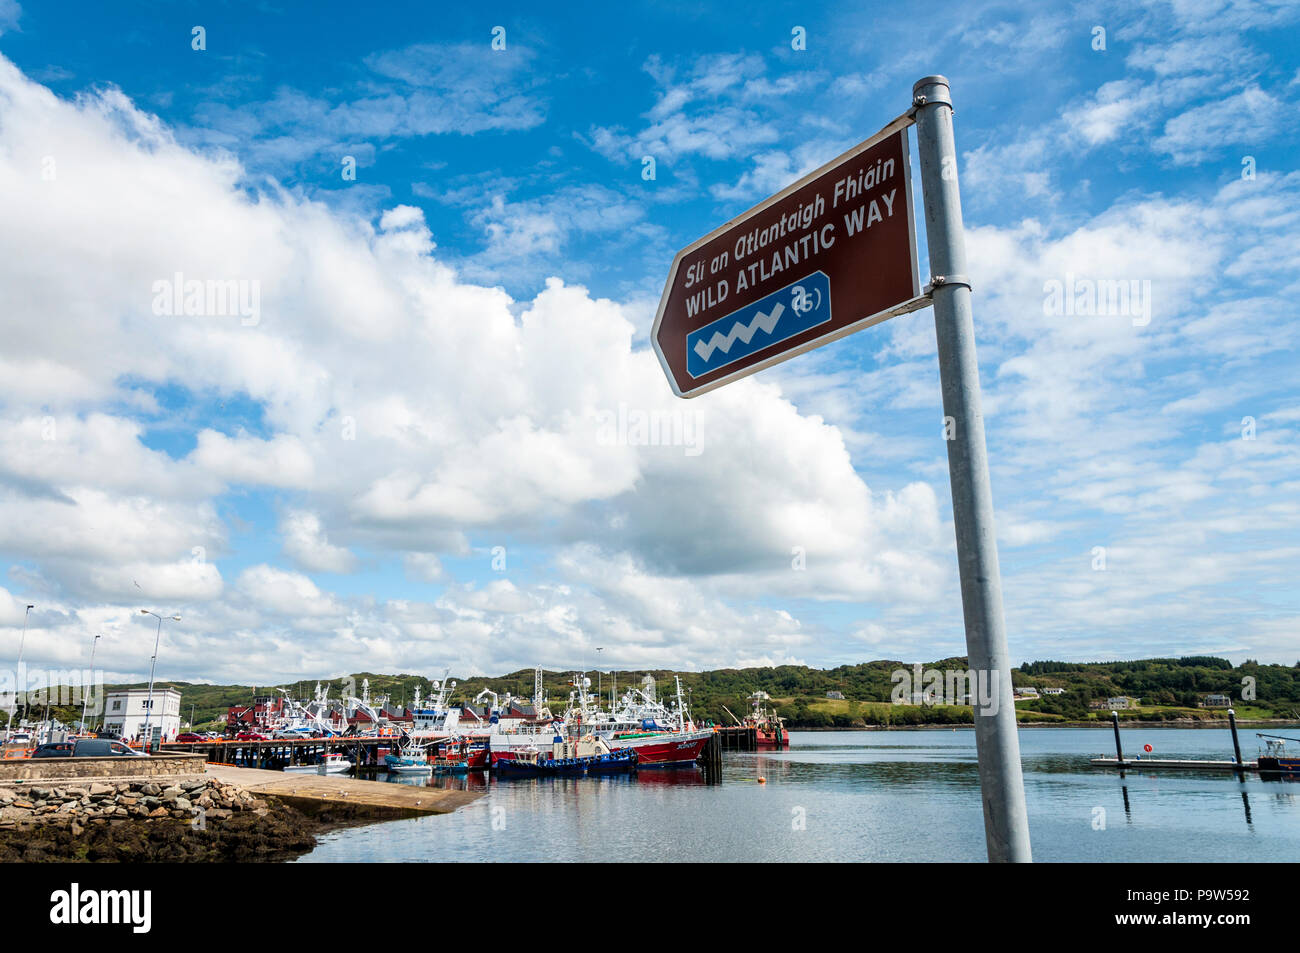 Wild Atlantic Way sign at Killybegs harbour, County Donegal, Ireland Stock Photo